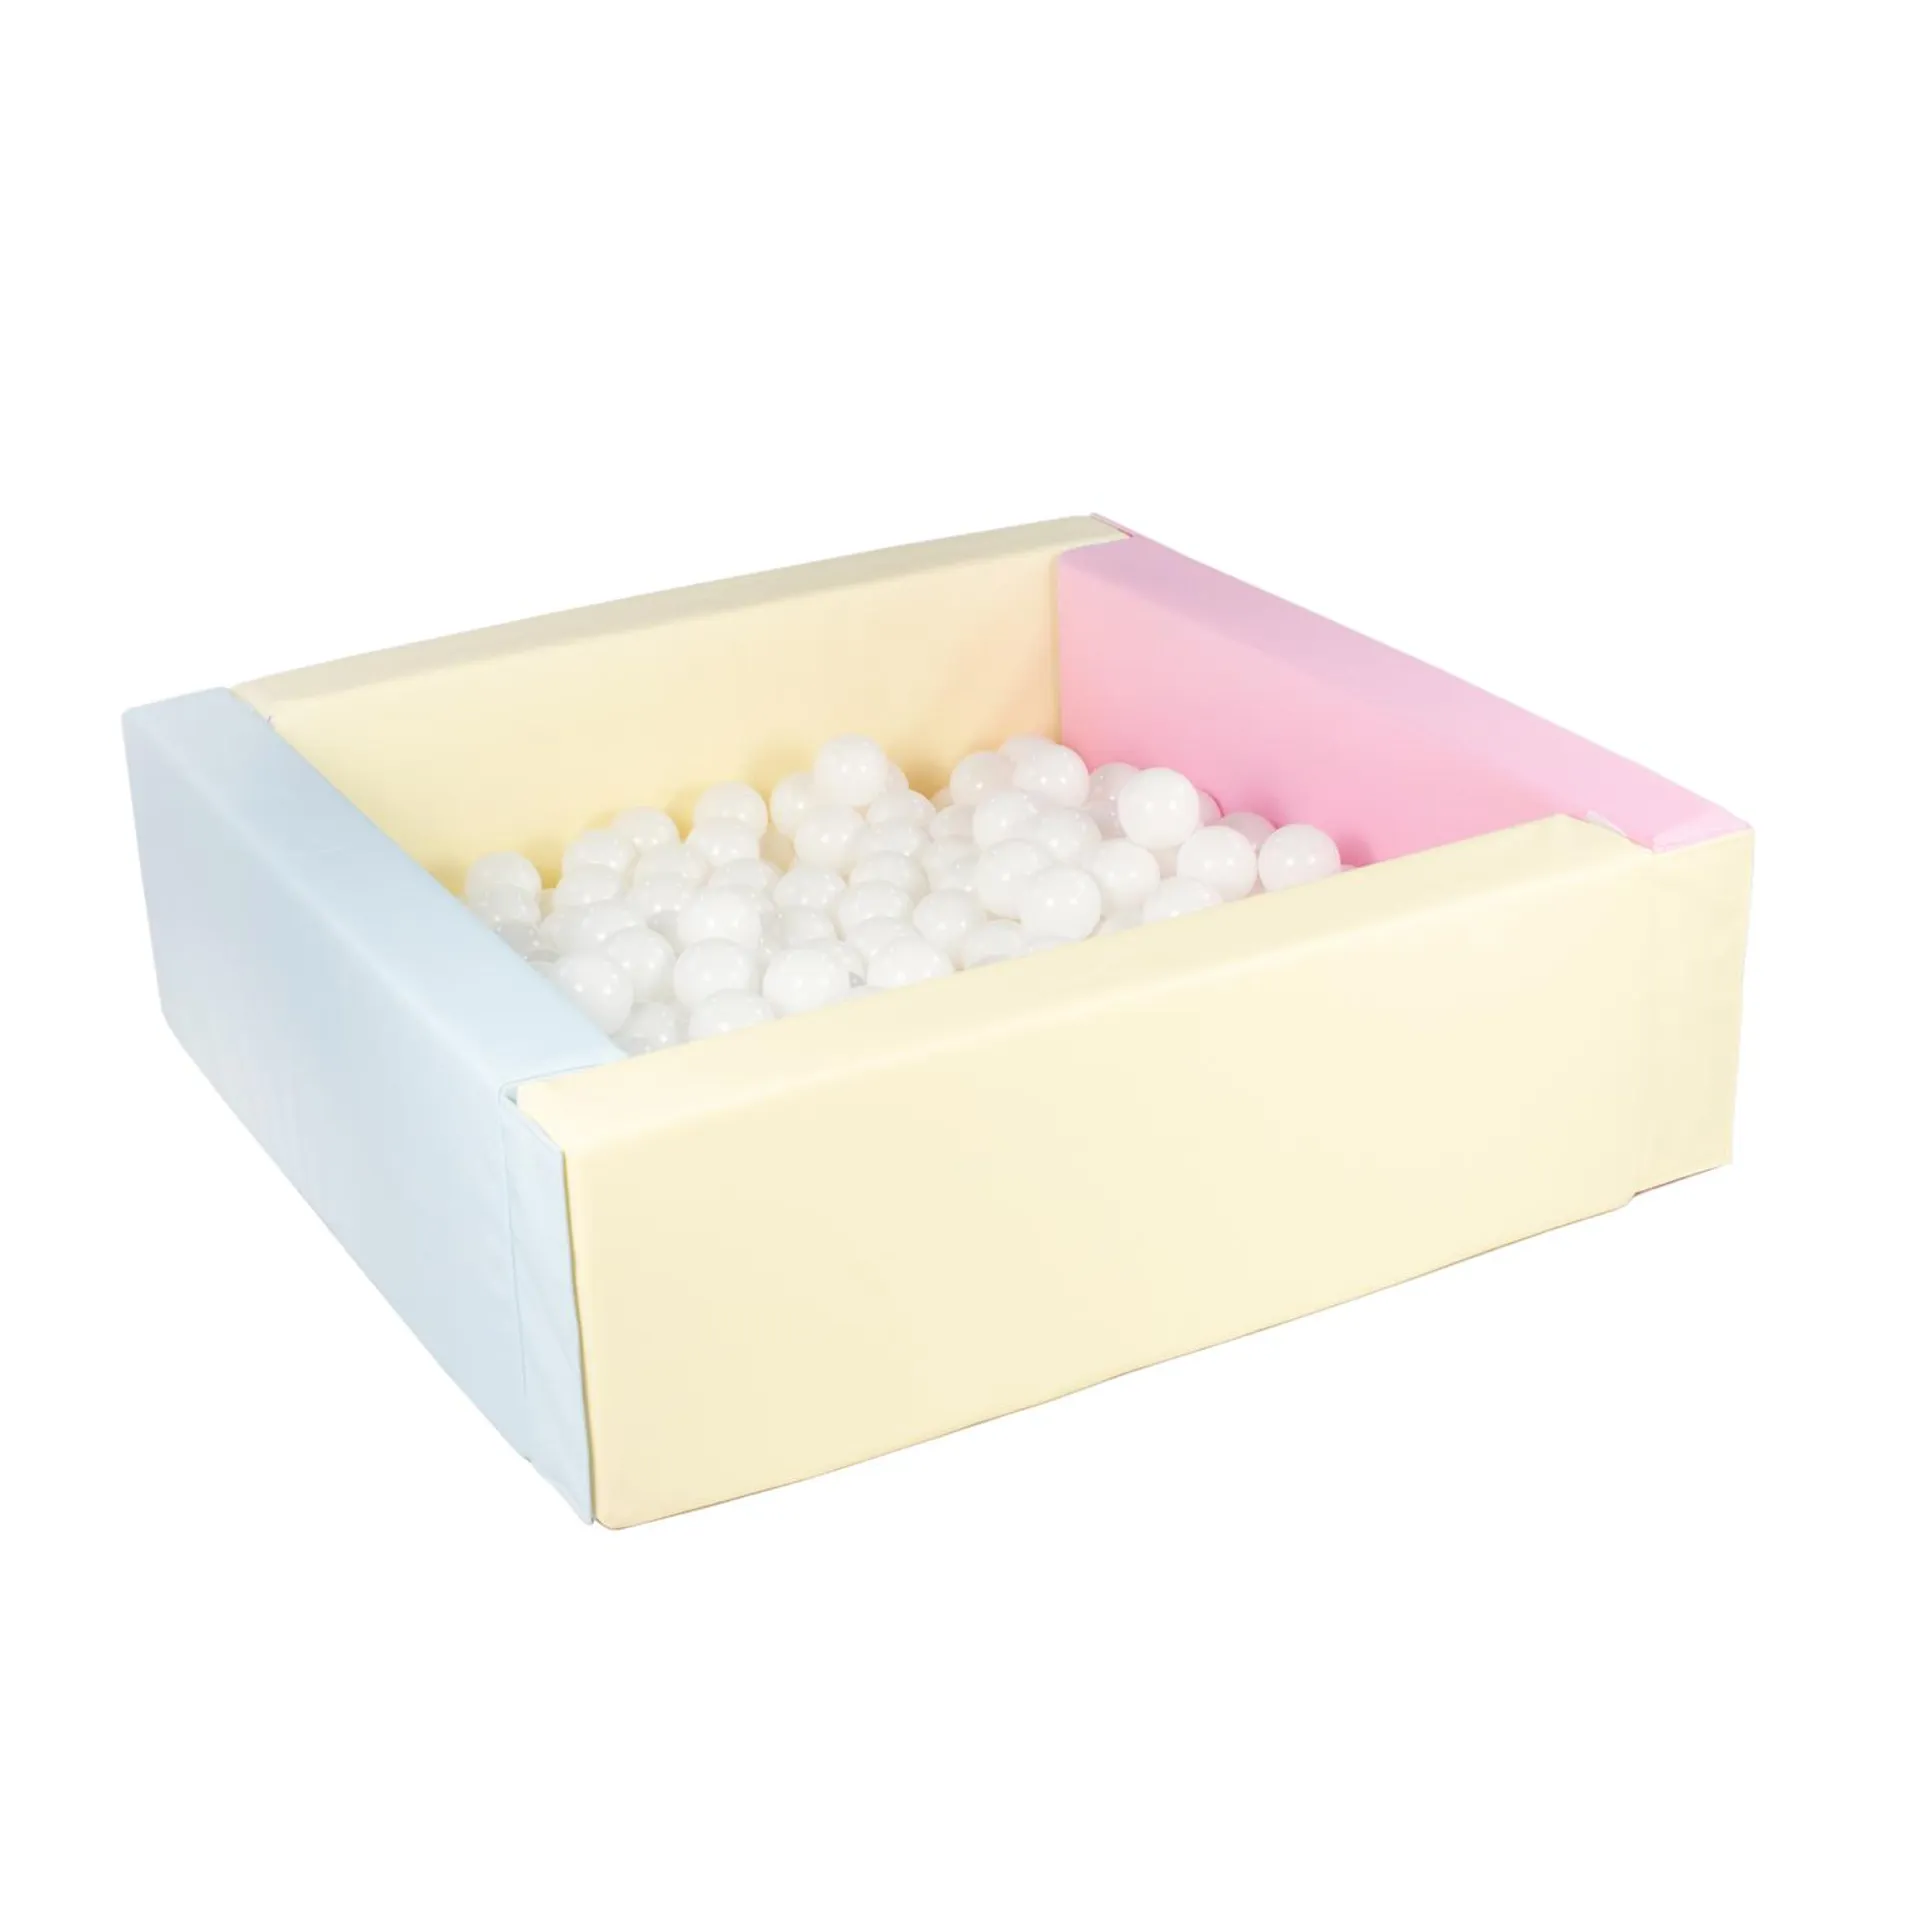 Eco Leather Ball Pit Pastel - 200 balls